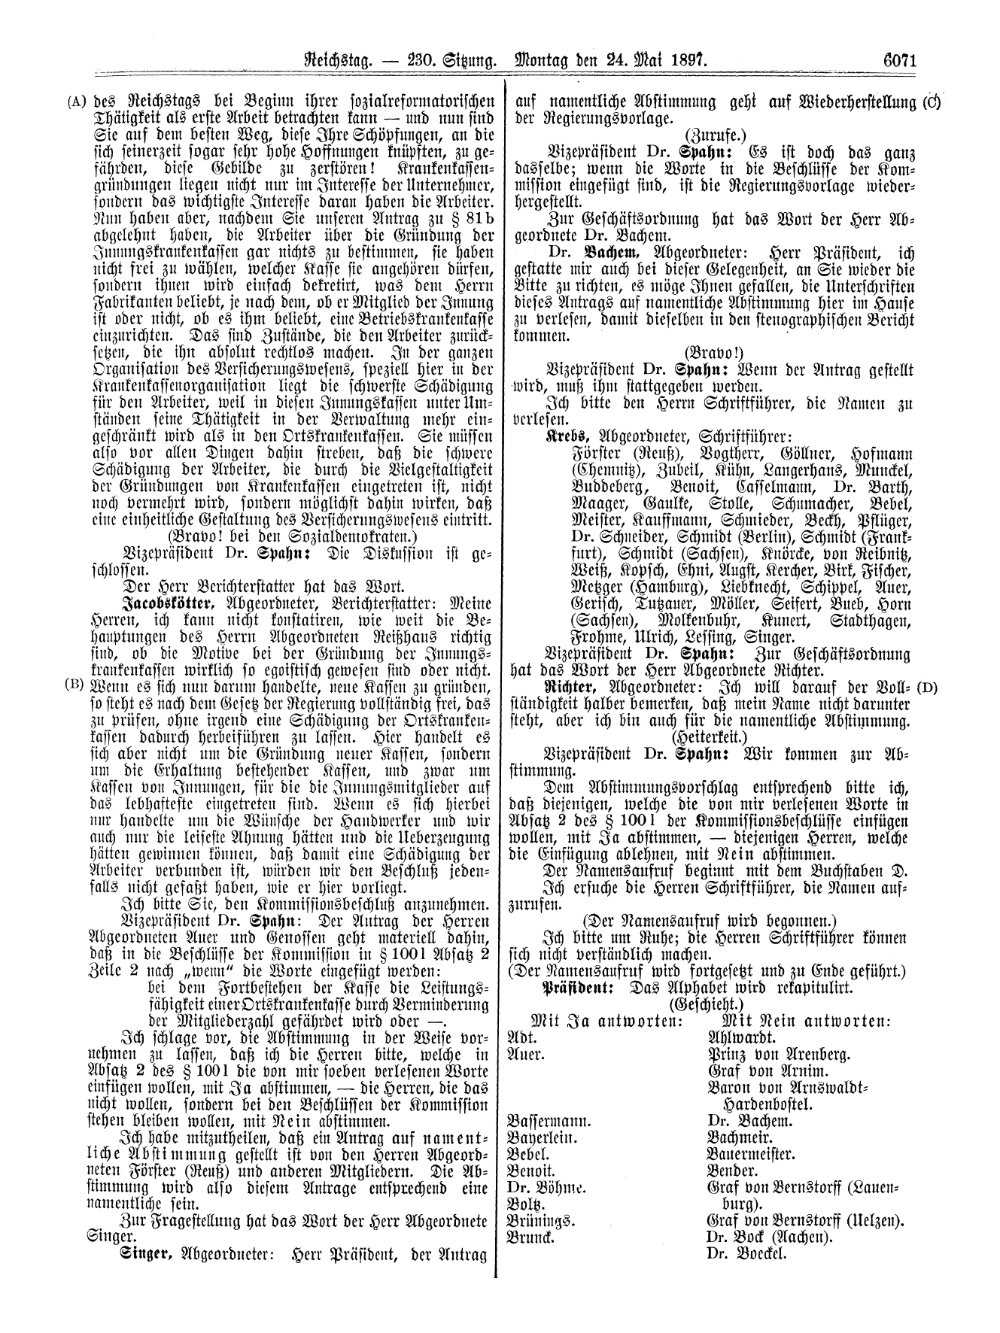 Scan of page 6071